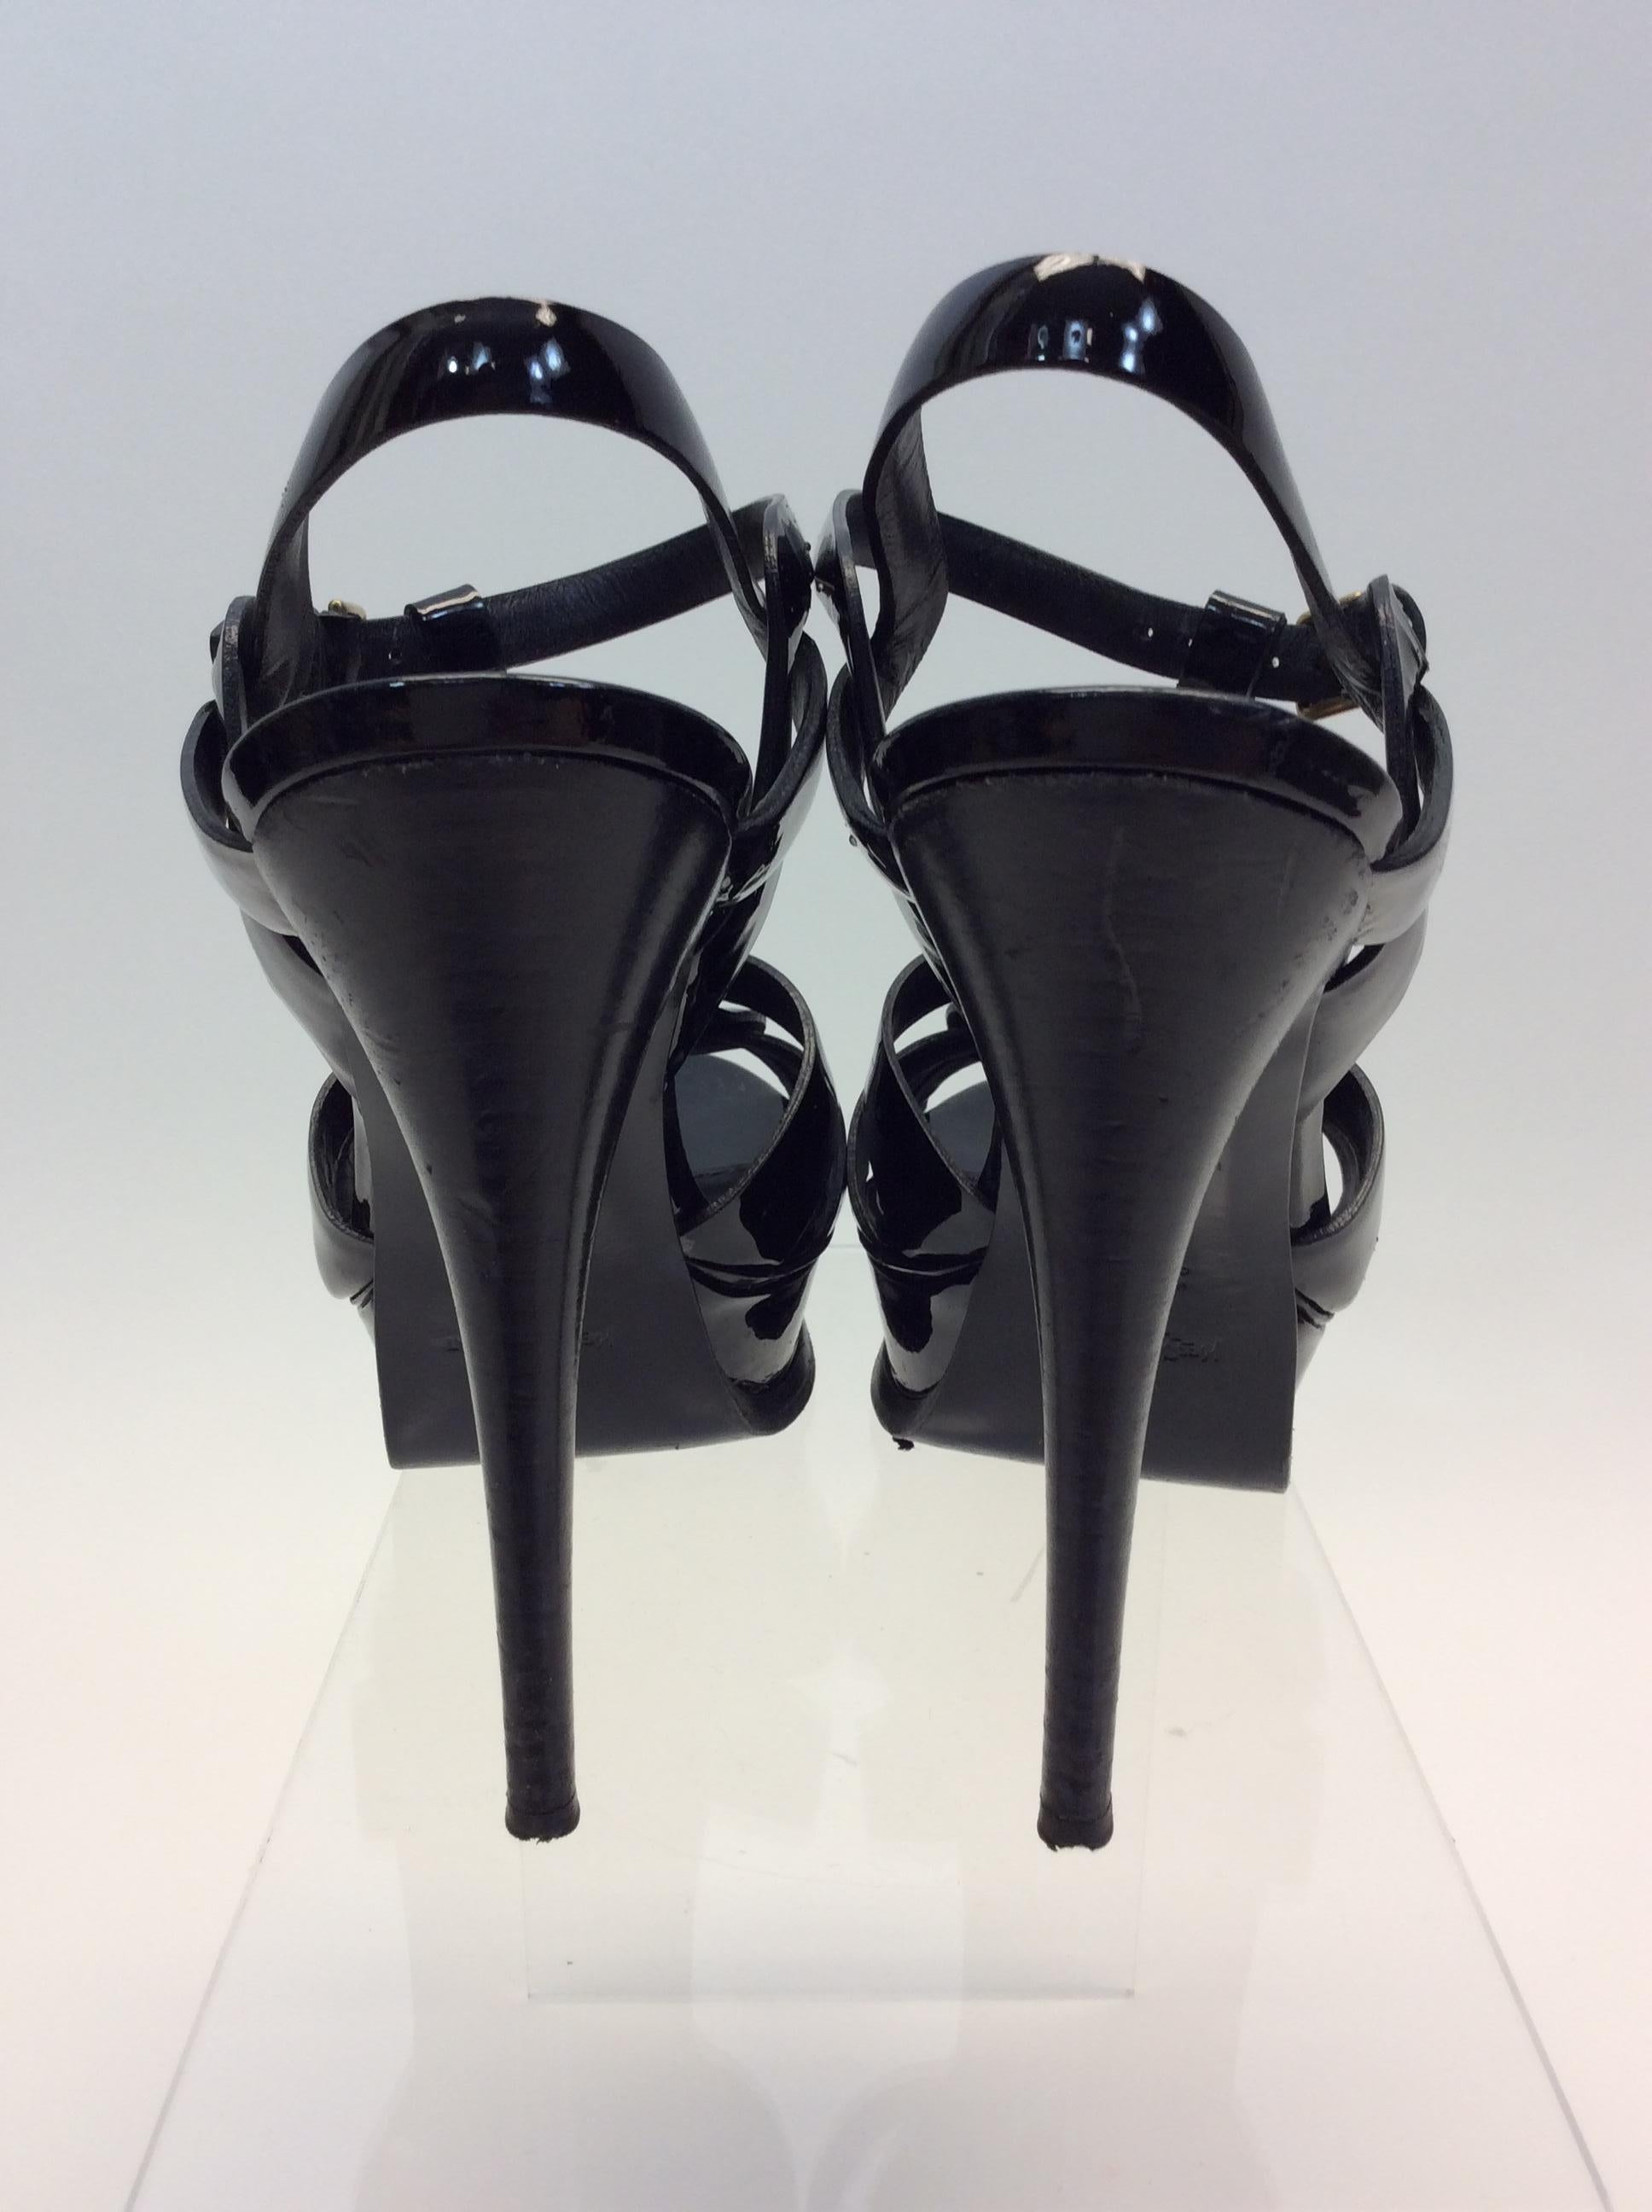 Yves Saint Laurent Black Patent Leather Tribute Heels In Good Condition For Sale In Narberth, PA